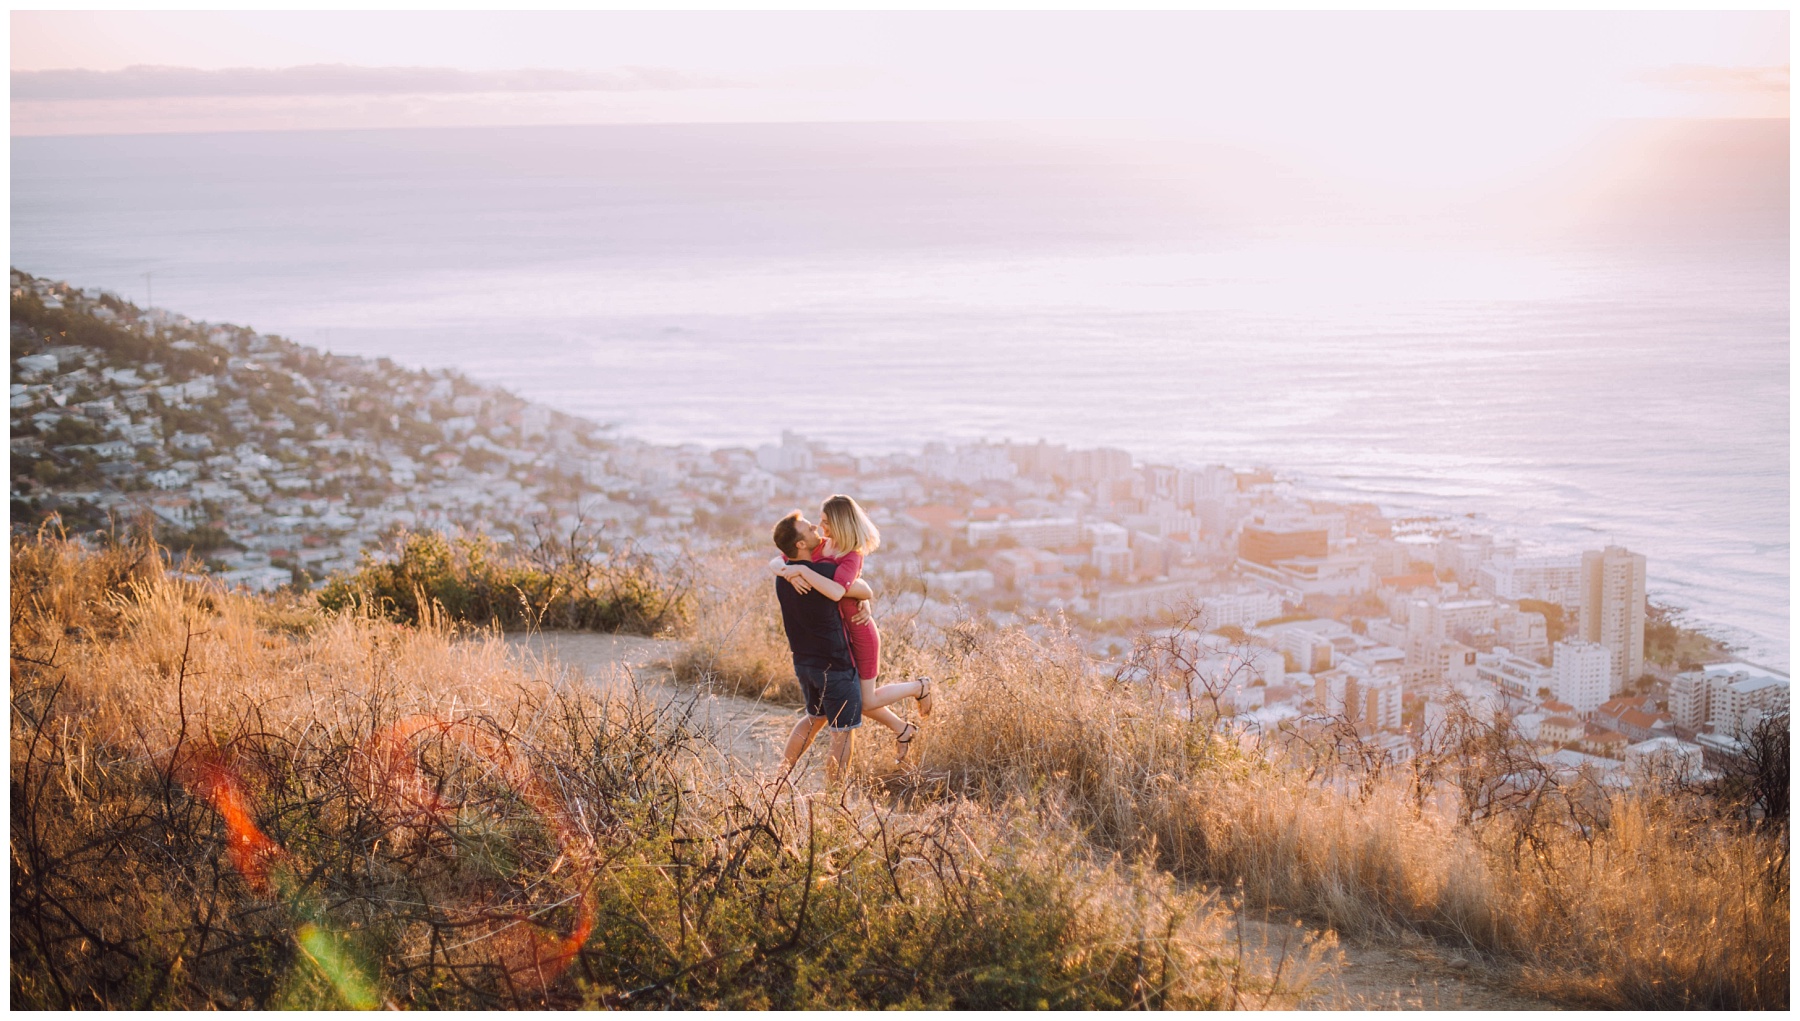 Ronel Kruger Cape Town Wedding and Lifestyle Photographer_2134.jpg